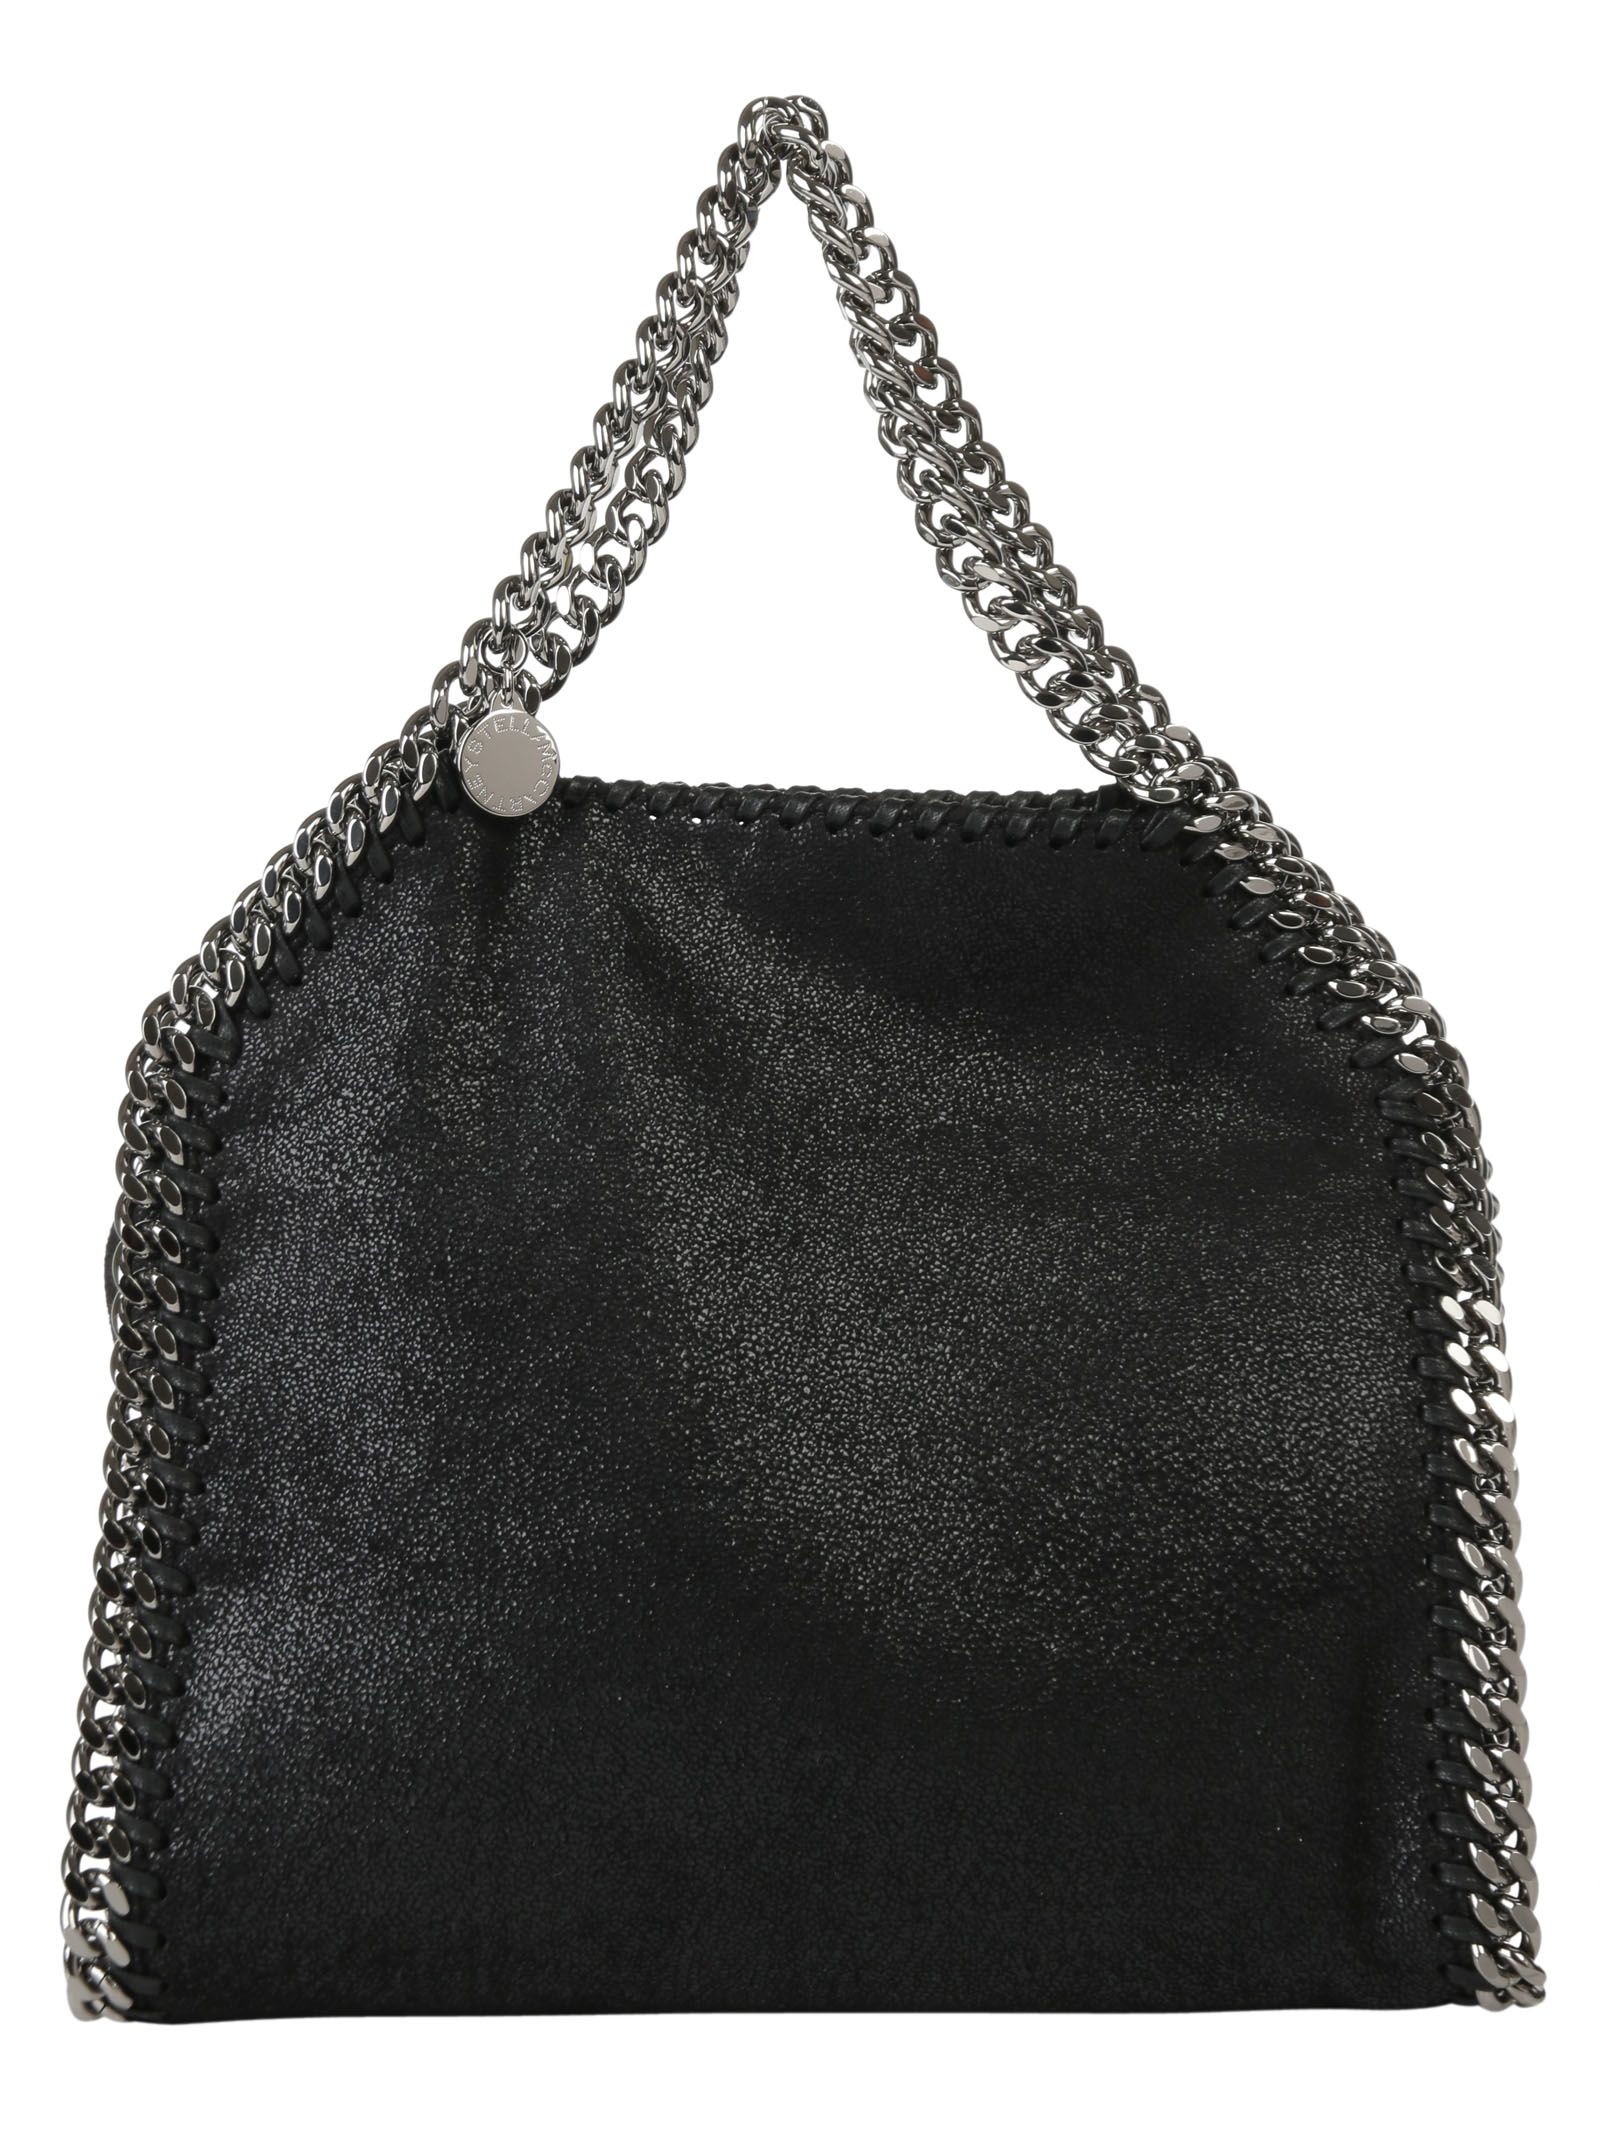 STELLA MCCARTNEY 'Small Falabella - Shaggy Deer' Faux Leather Tote ...